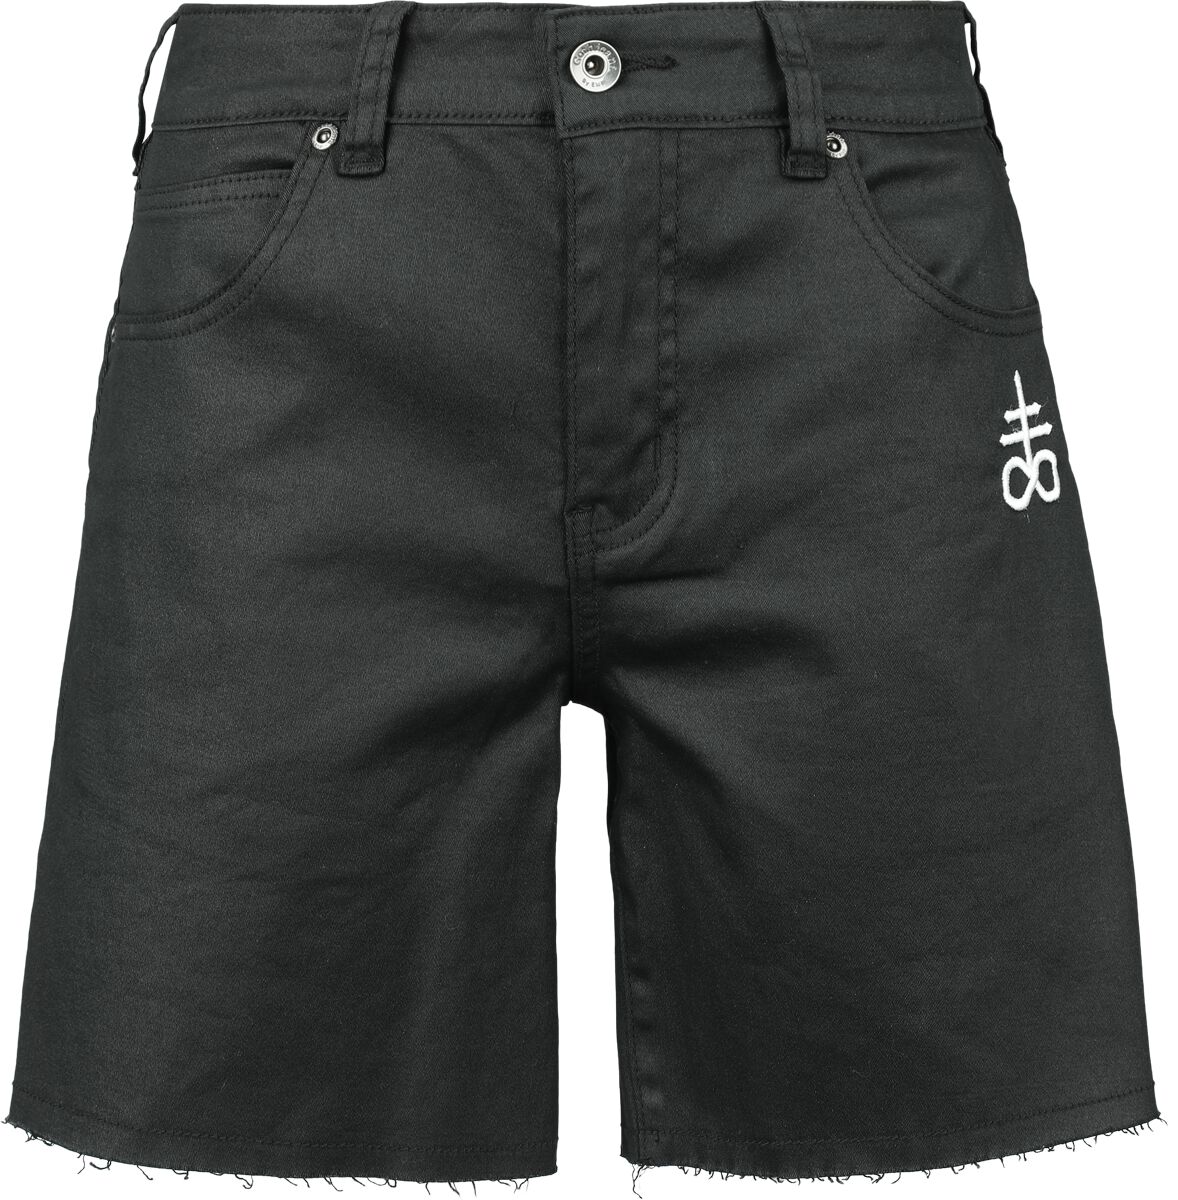 Black Blood by Gothicana Coated Shorts with Small Embroidery Short schwarz in 29